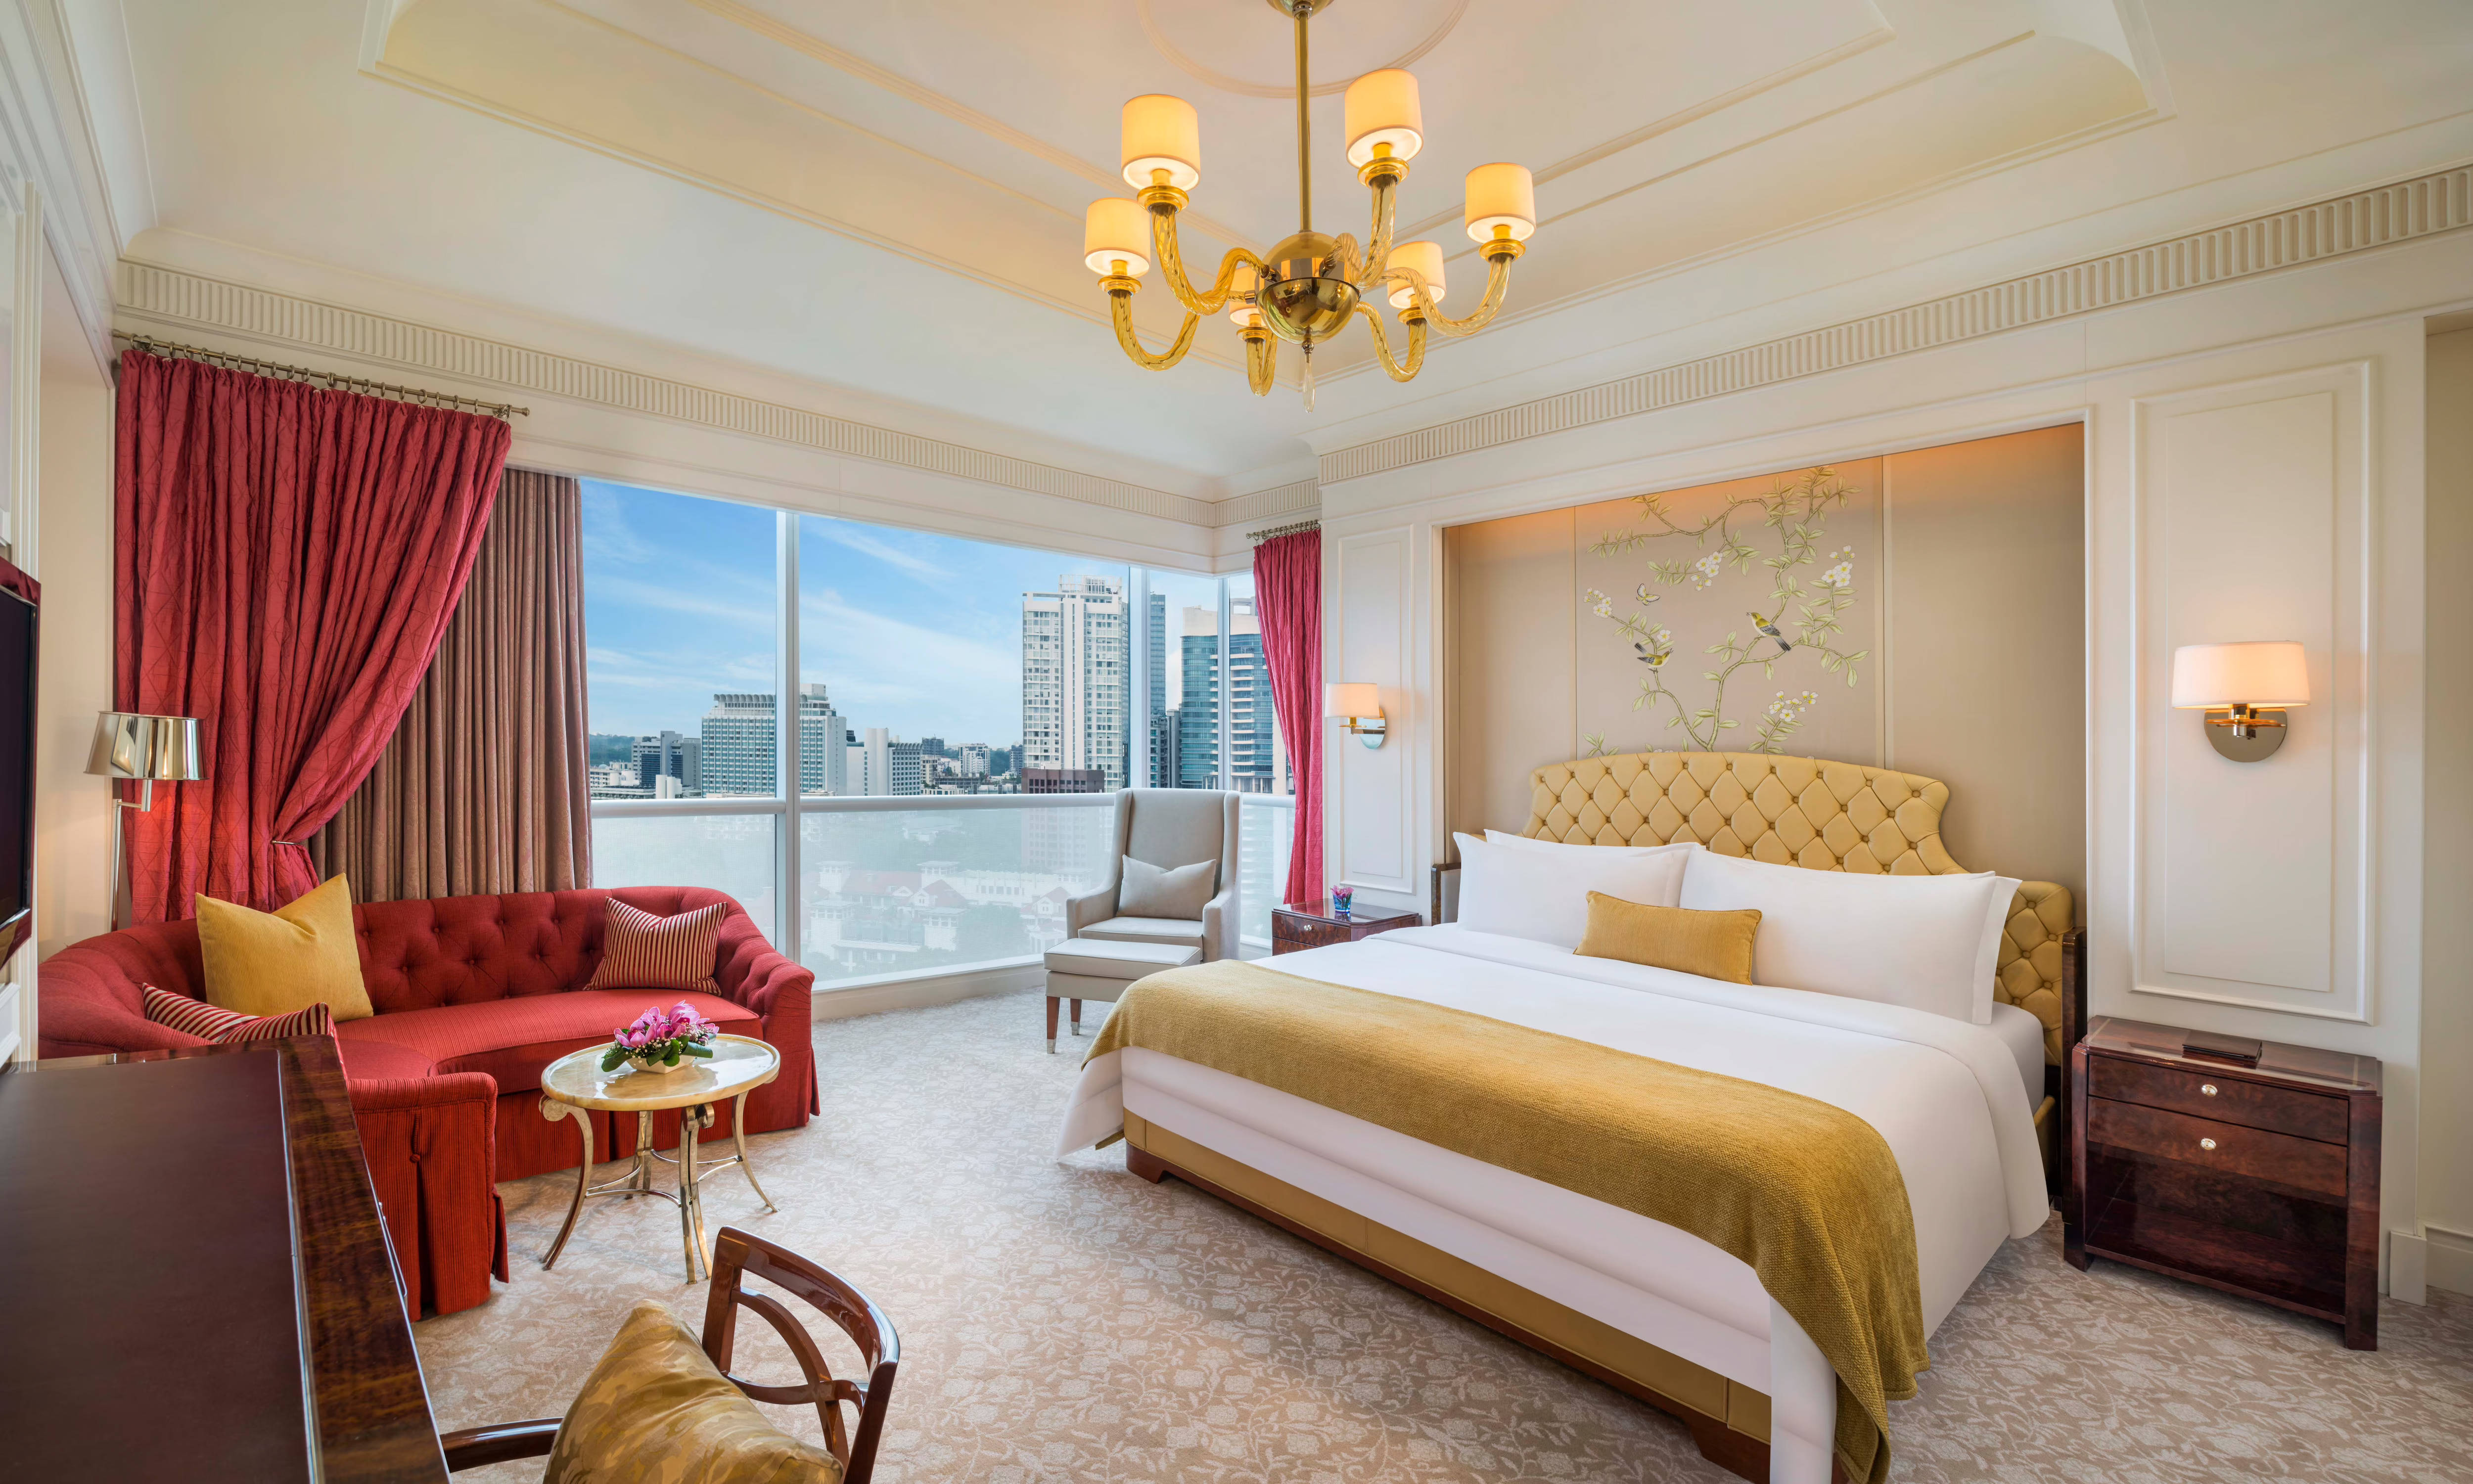 Enjoy exclusive rate when you book the Grand Deluxe King with The St. Regis Singapore